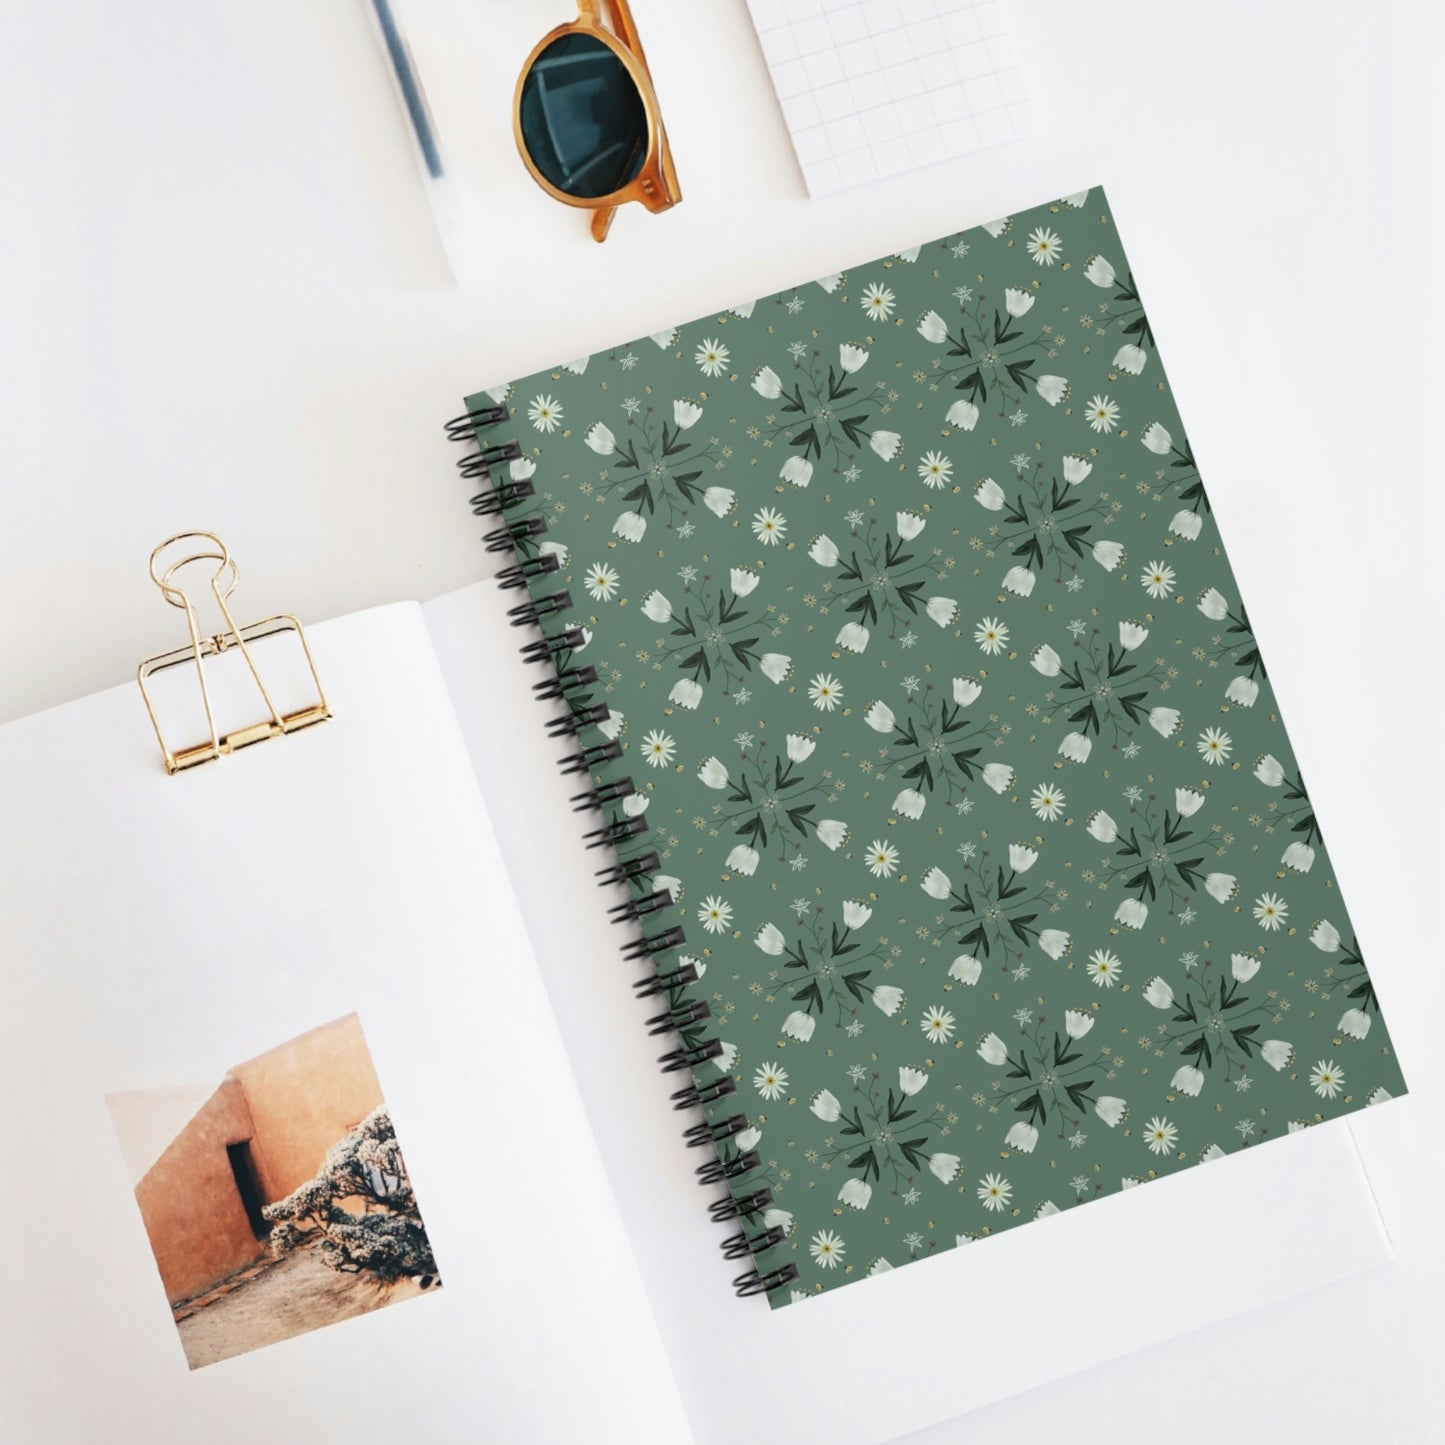 Spring Bees Green Spiral Notebook - Ruled Line